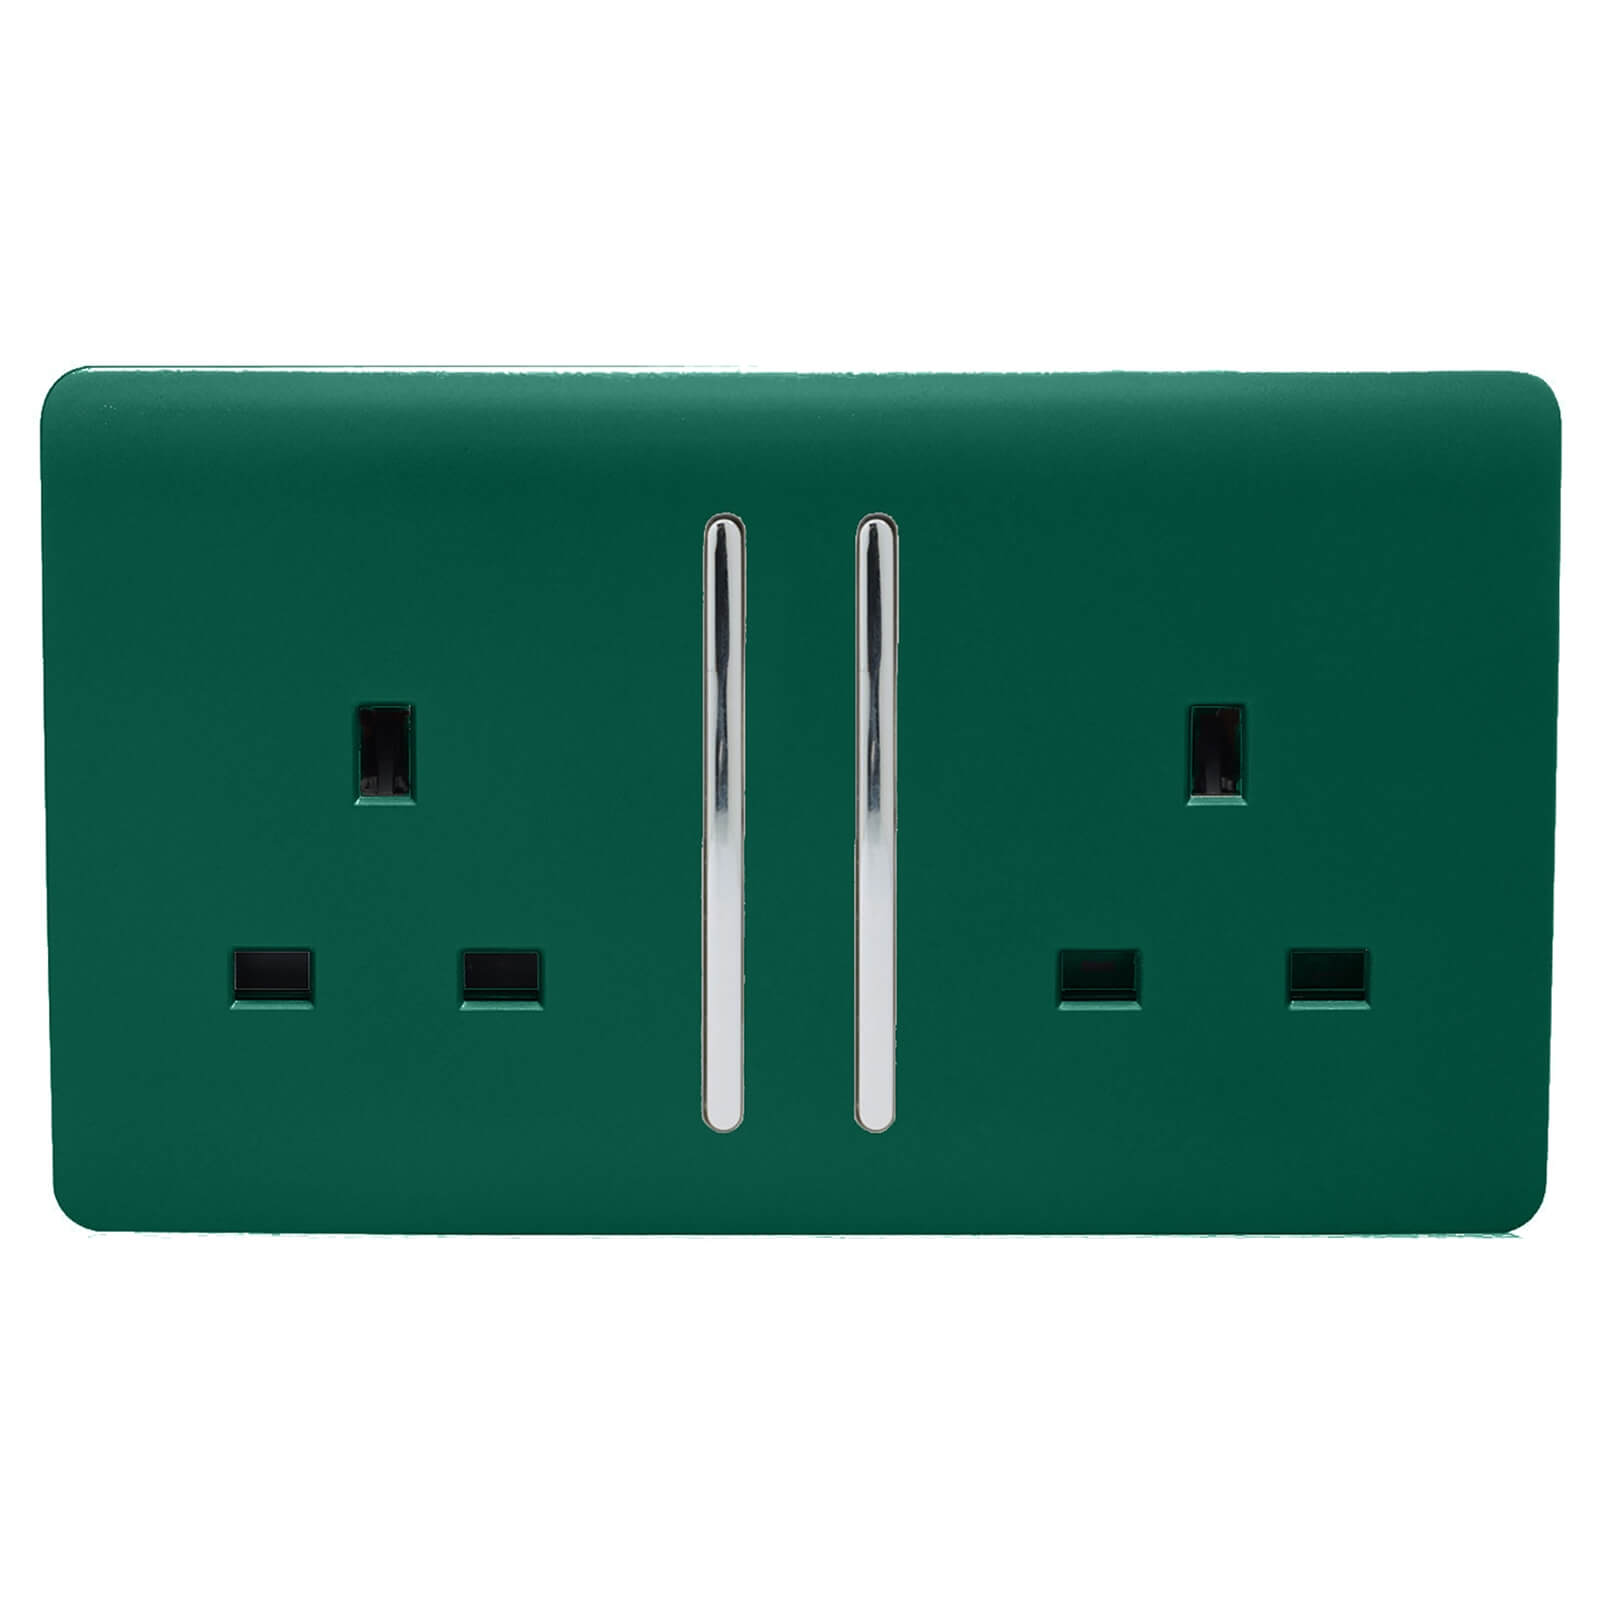 Trendi Switch 2 Gang 13Amp Long Switched Socket in Dark Green